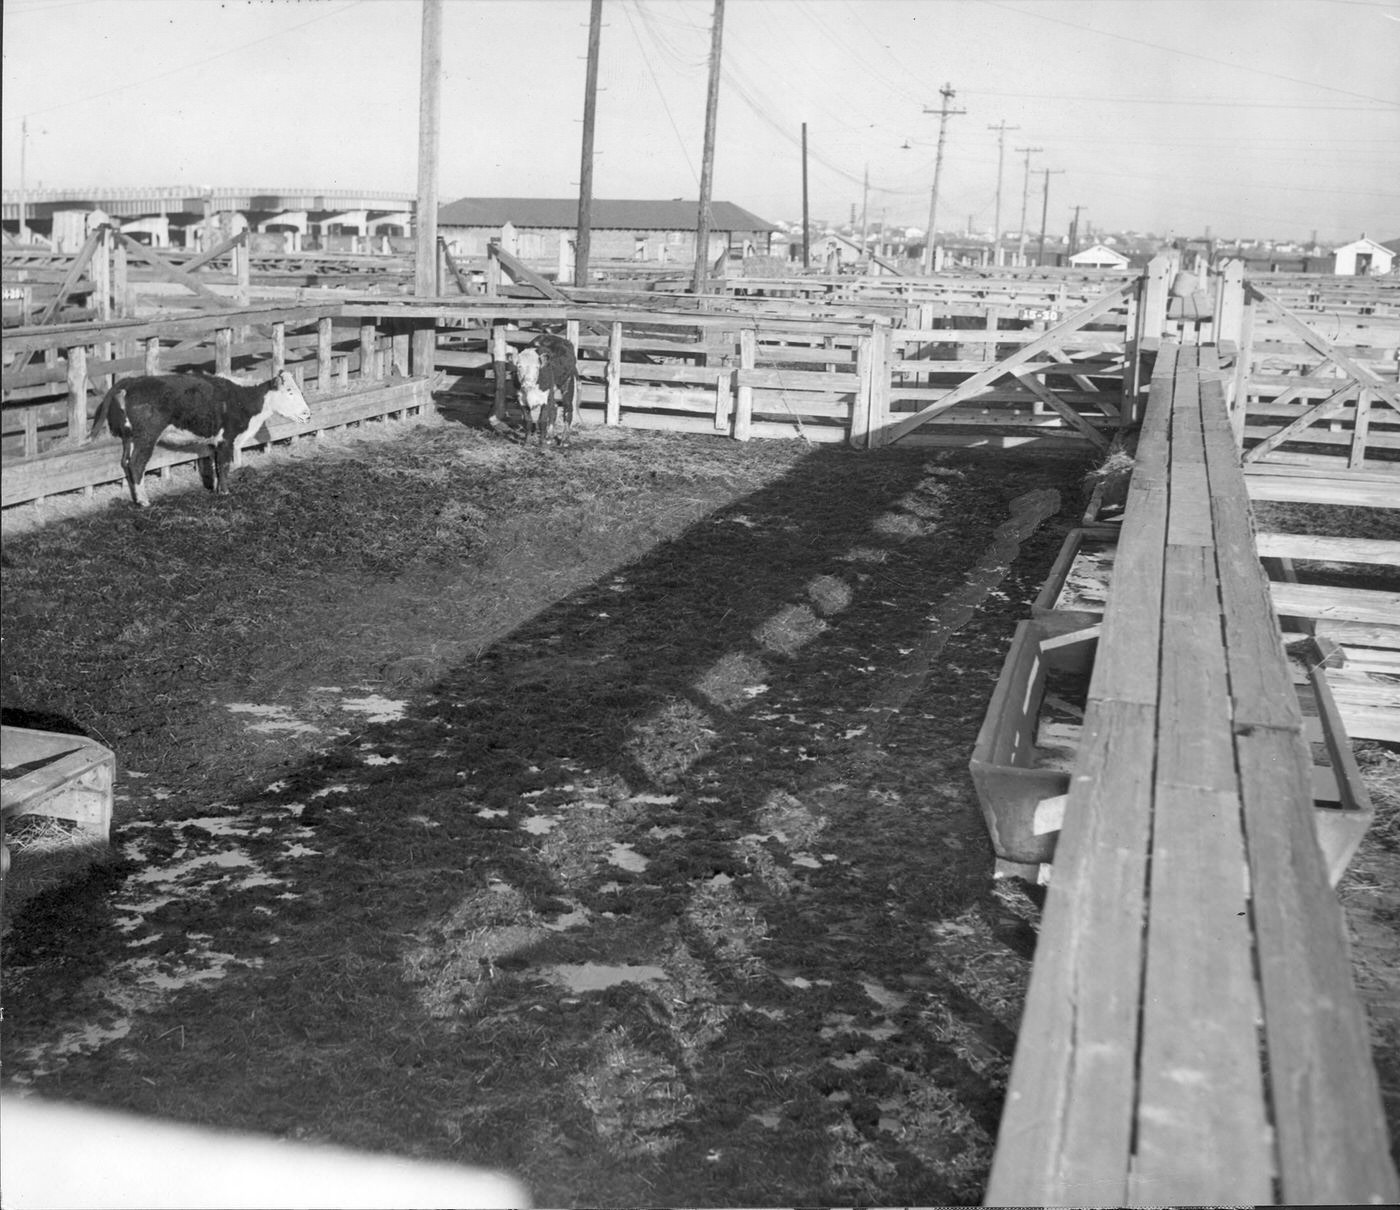 Stockyards pens lonely, cattle pen with 2 cows during workers strike, Fort Worth Stockyards, 1940